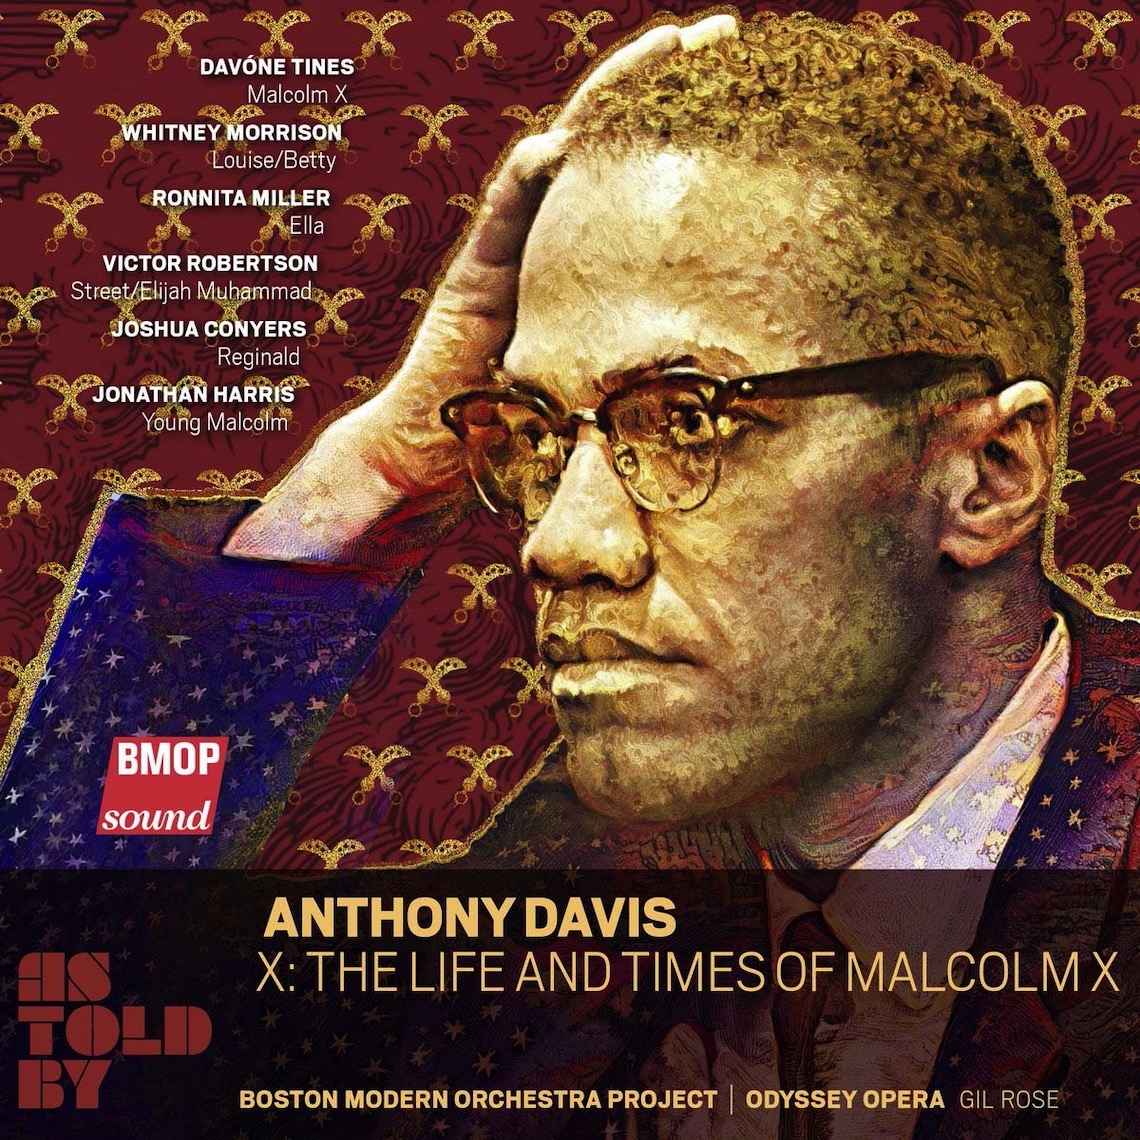 Album cover to the Grammy-nominated recording of the opera "X: The Life and Times of Malcolm X."